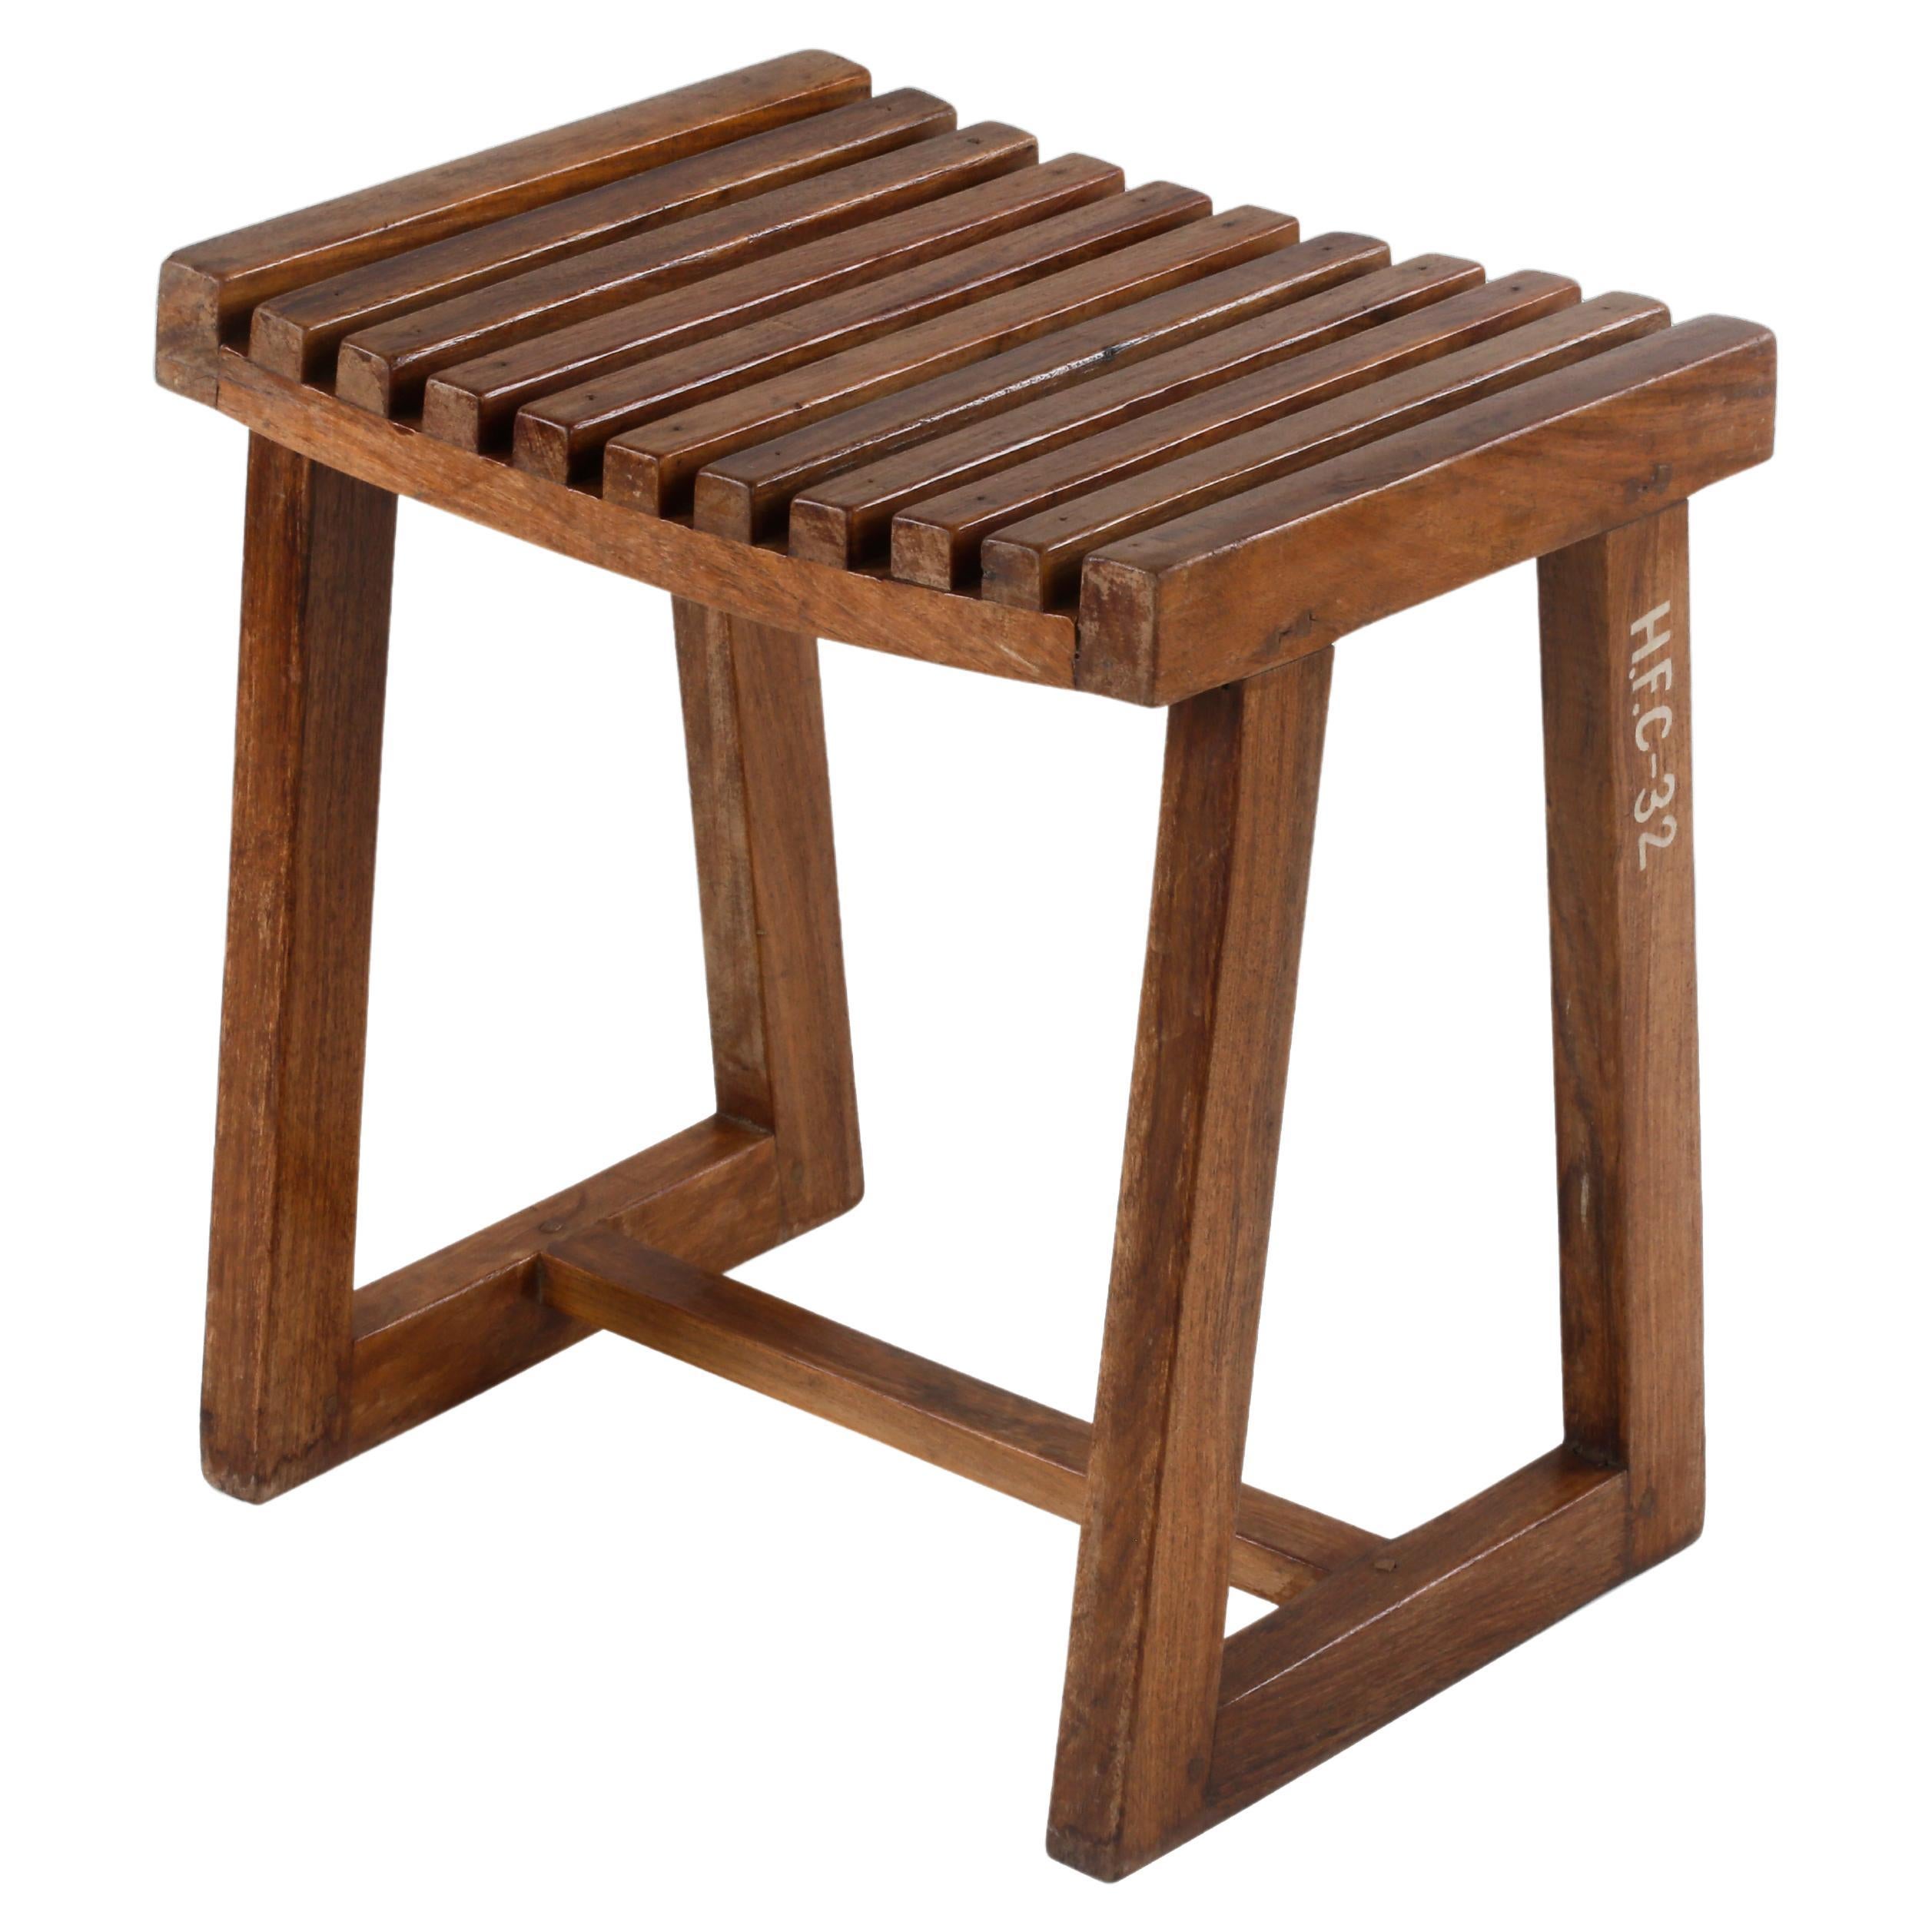 Pierre Jeanneret PJ-SI-55-a Stool / Authentic Mid-Century Modern Chandigarh